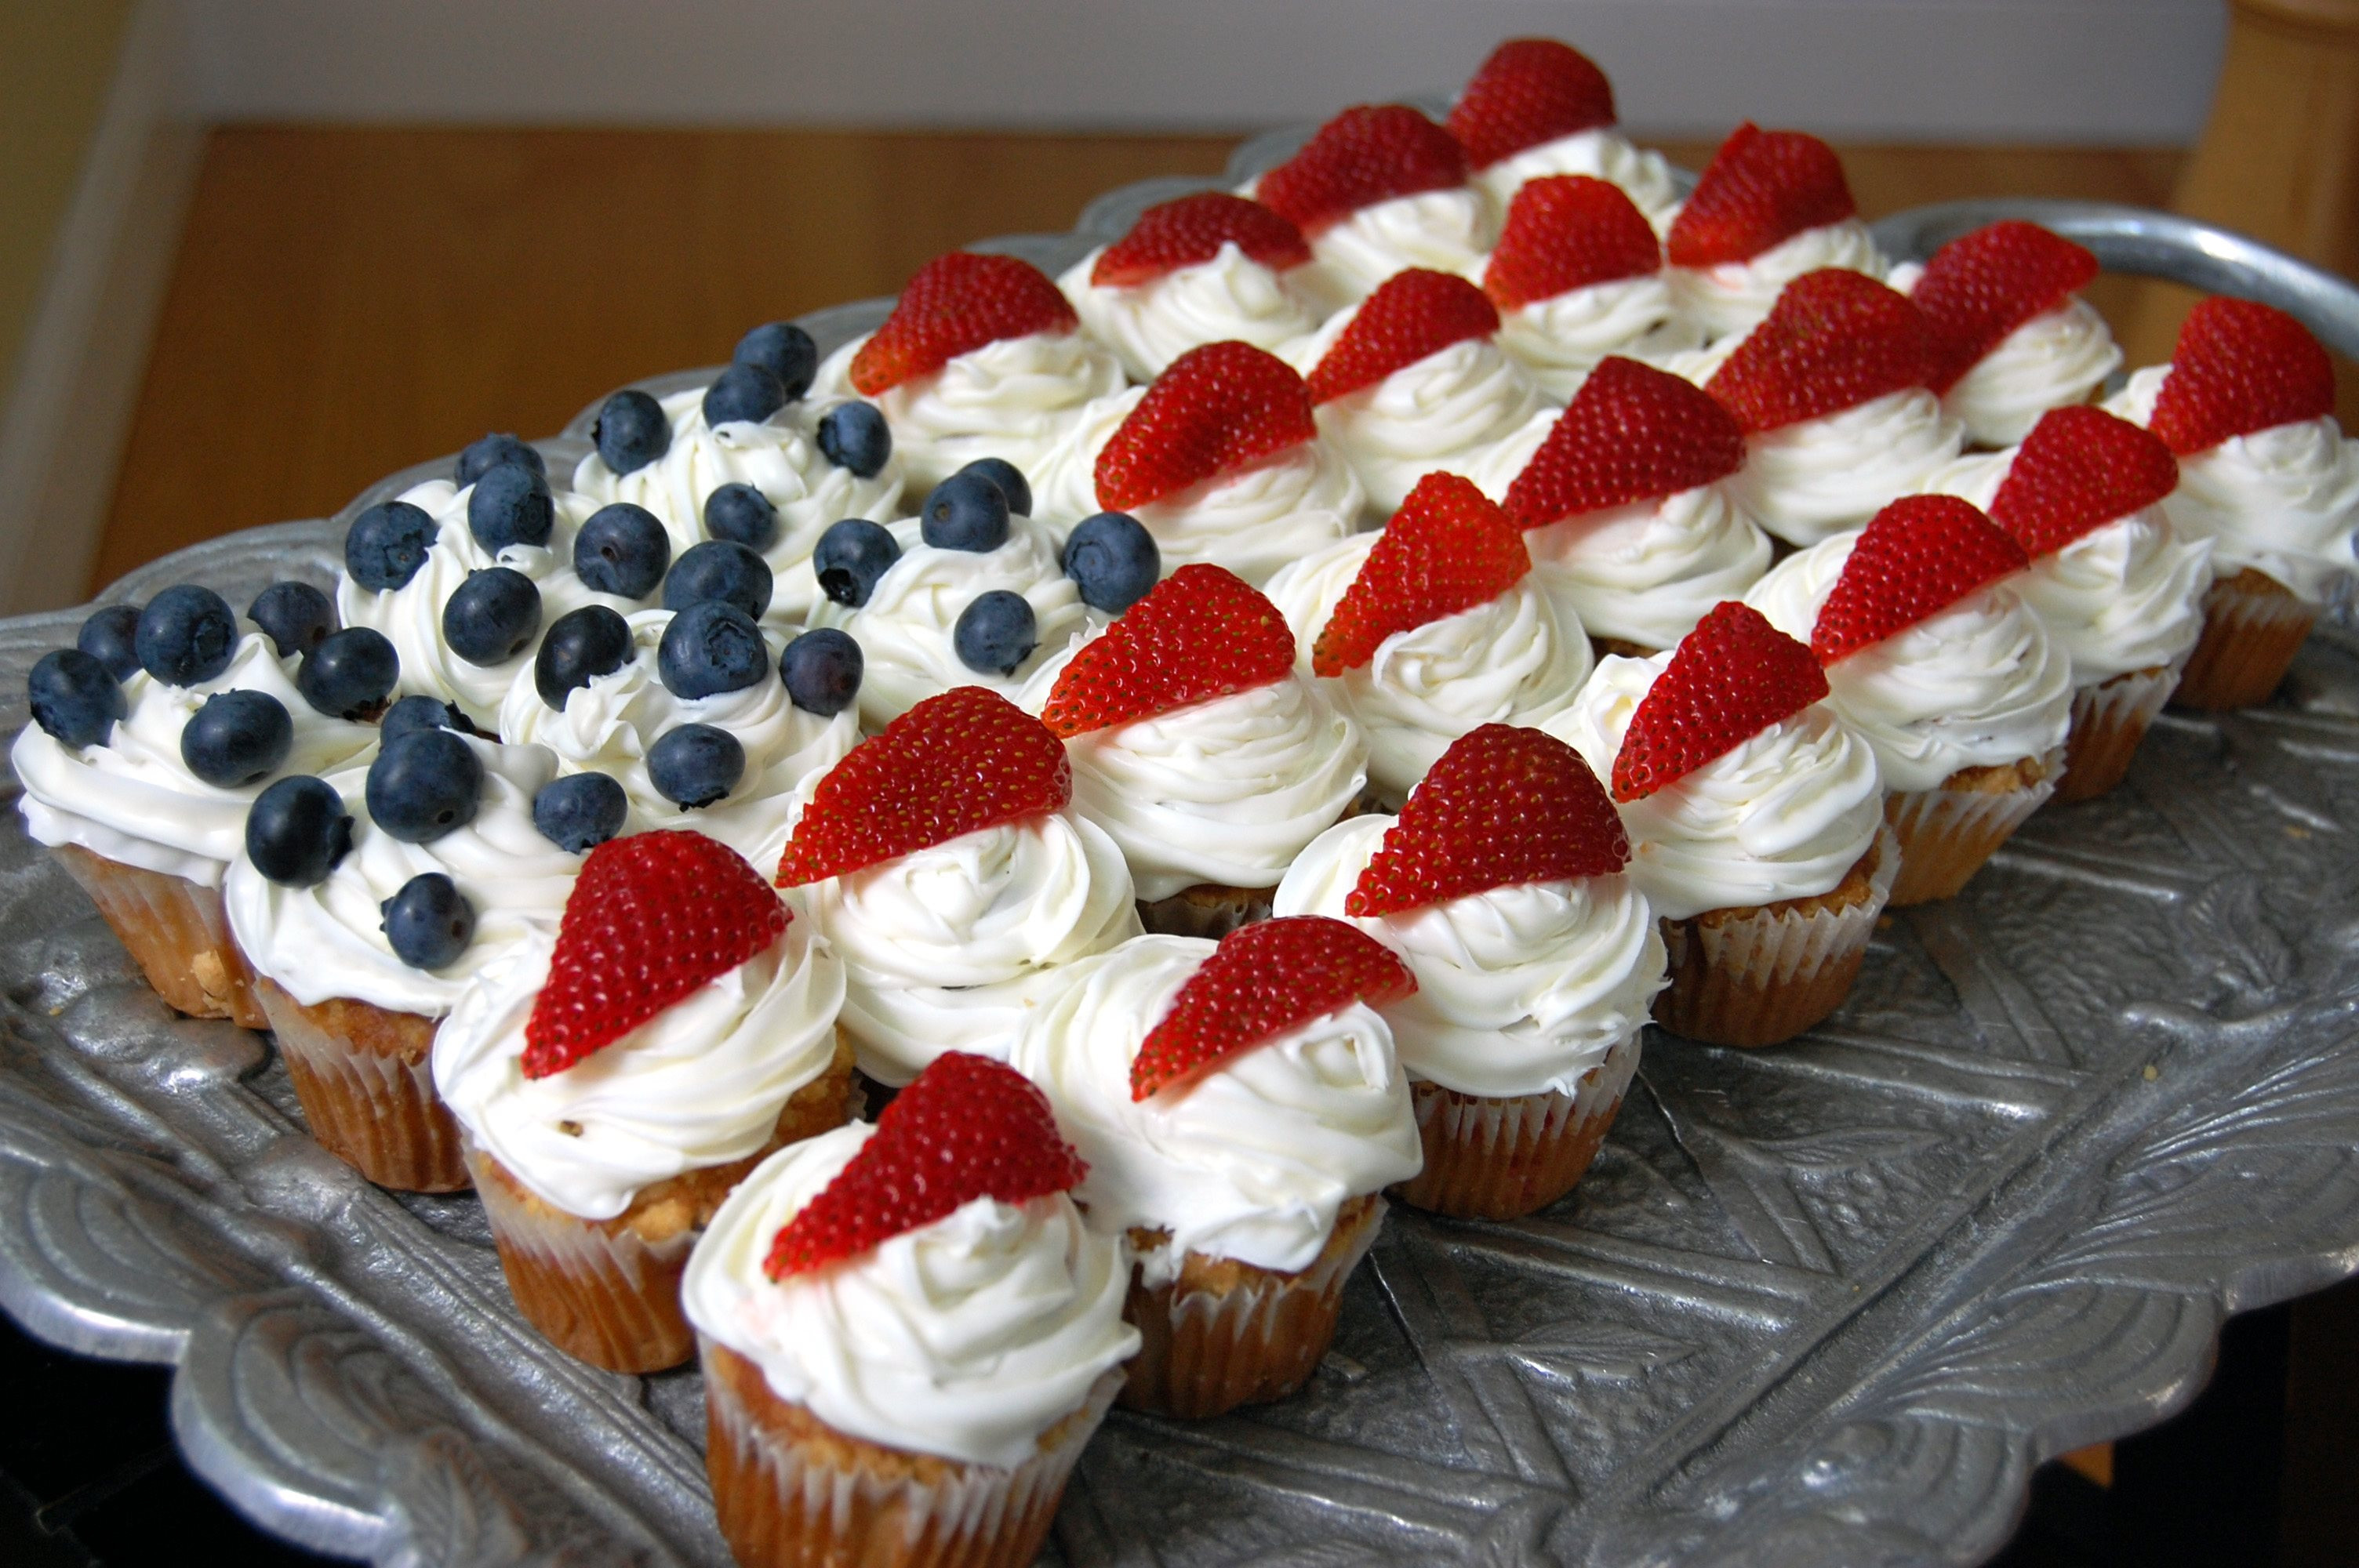 4Th Of July Desserts Easy Recipes
 20 Lazy Yet Super Awesome 4th of July Ideas Gluten Free